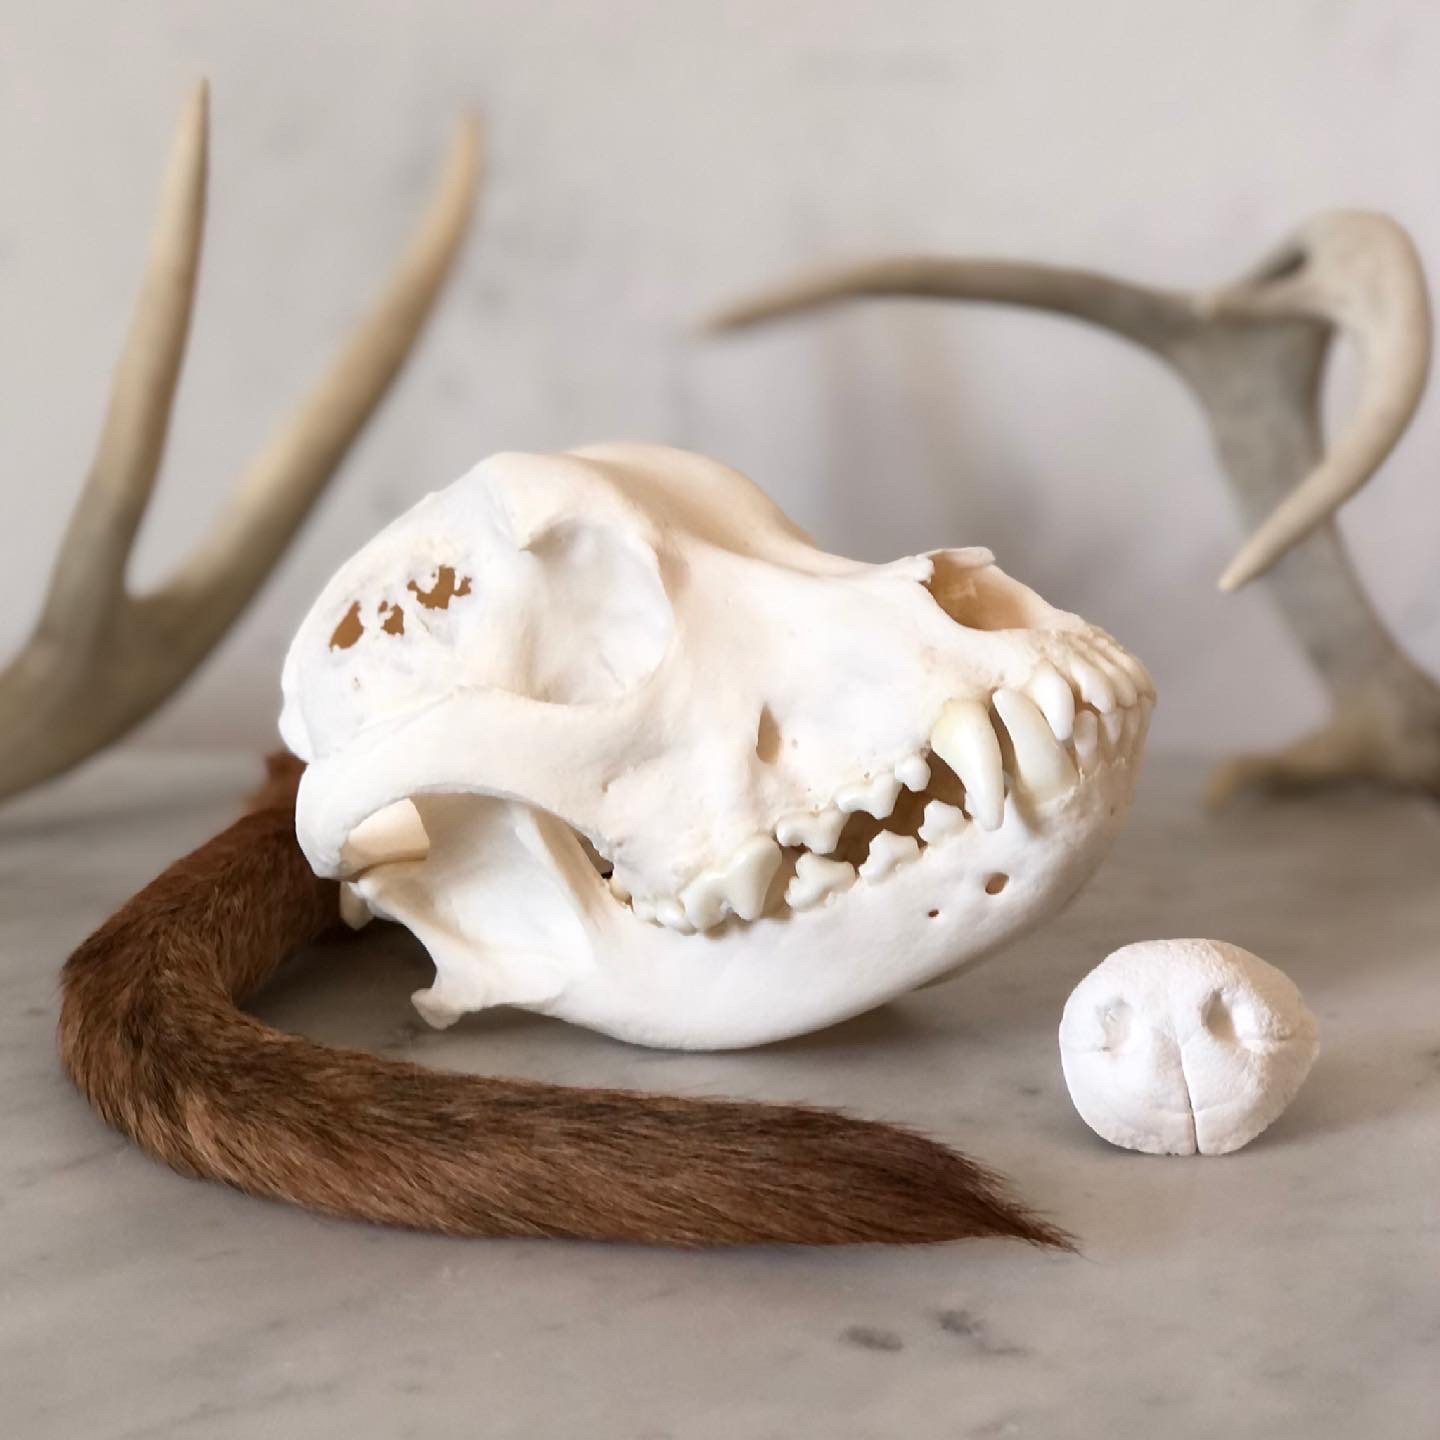 Small dog's skull with a nose cast and tail preservation next to them. Antlers are in the background.